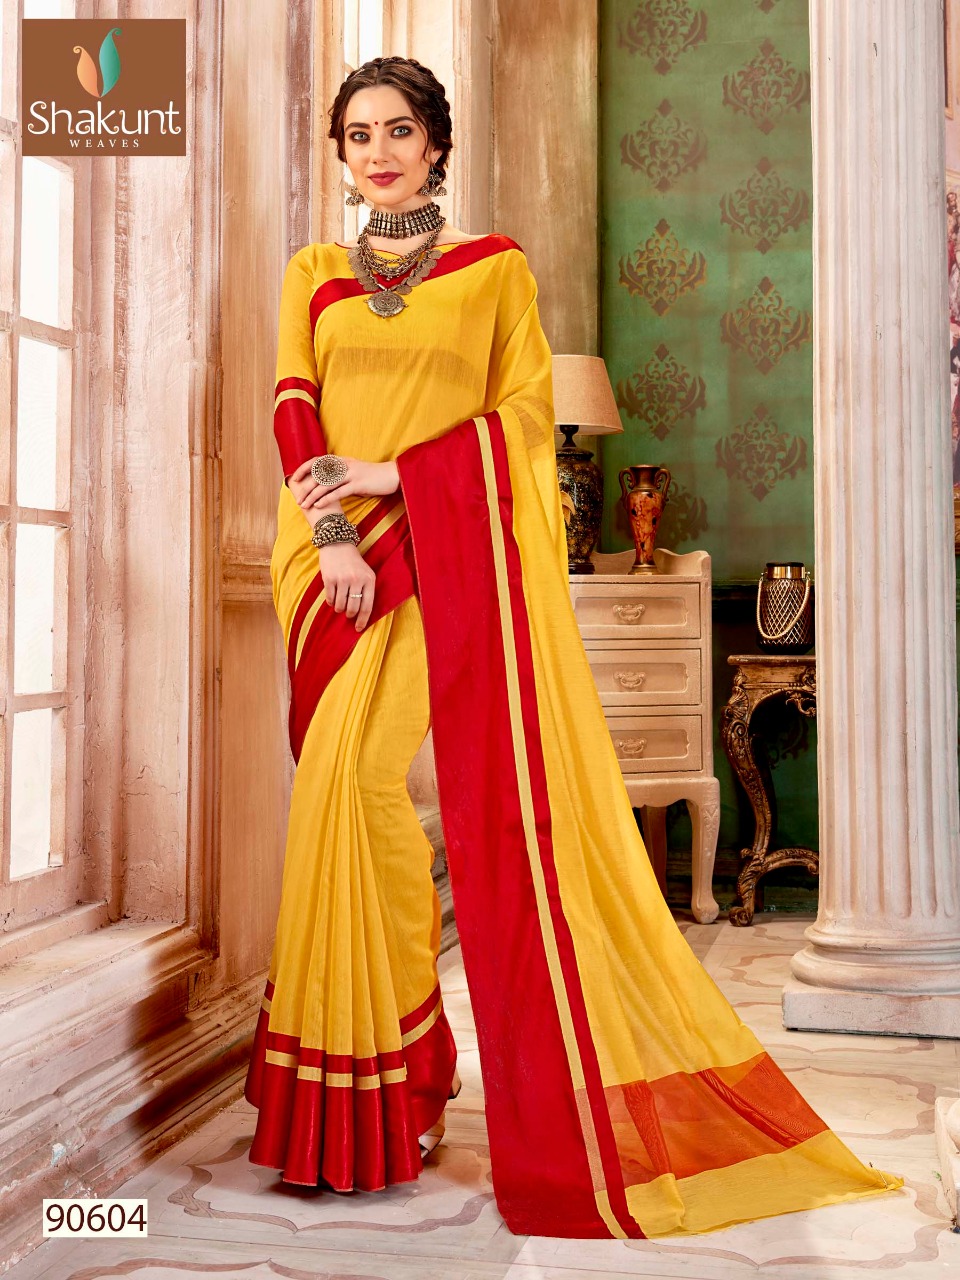 Shakunt weaves harsha beautiful sarees collection at wholesale rate